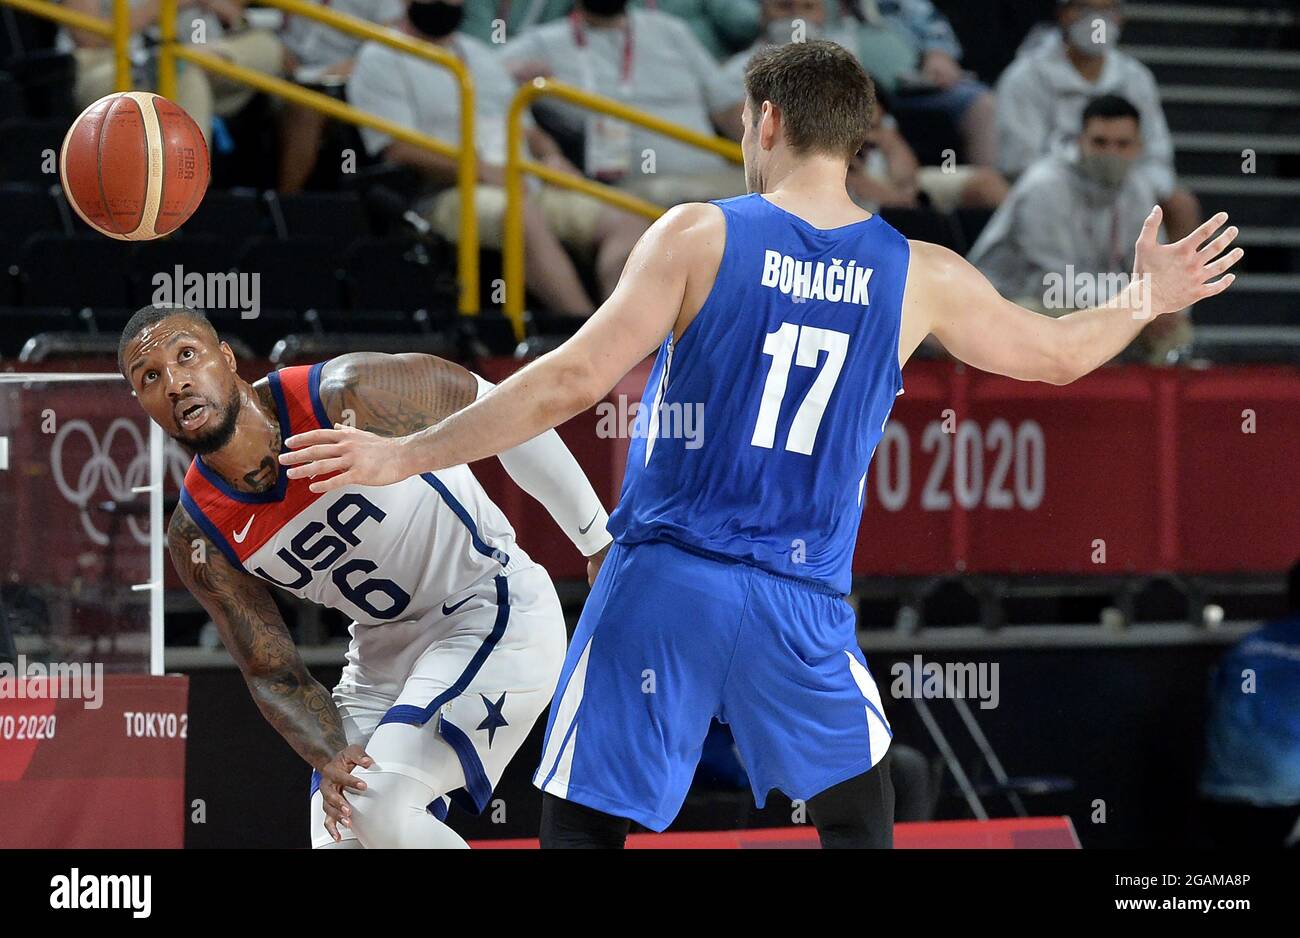 Tokyo, Japan. 31st July, 2021. The ball is up for grabs by United States' Damian Lillard (L) and Czechoslovakia's Jaromir Bohacik during a Men's Basketball game at the Tokyo 2020 Olympics, Saturday, July 31, 2021, in Tokyo, Japan. USA won, 119-84. Photo by Mike Theiler/UPI Credit: UPI/Alamy Live News Stock Photo